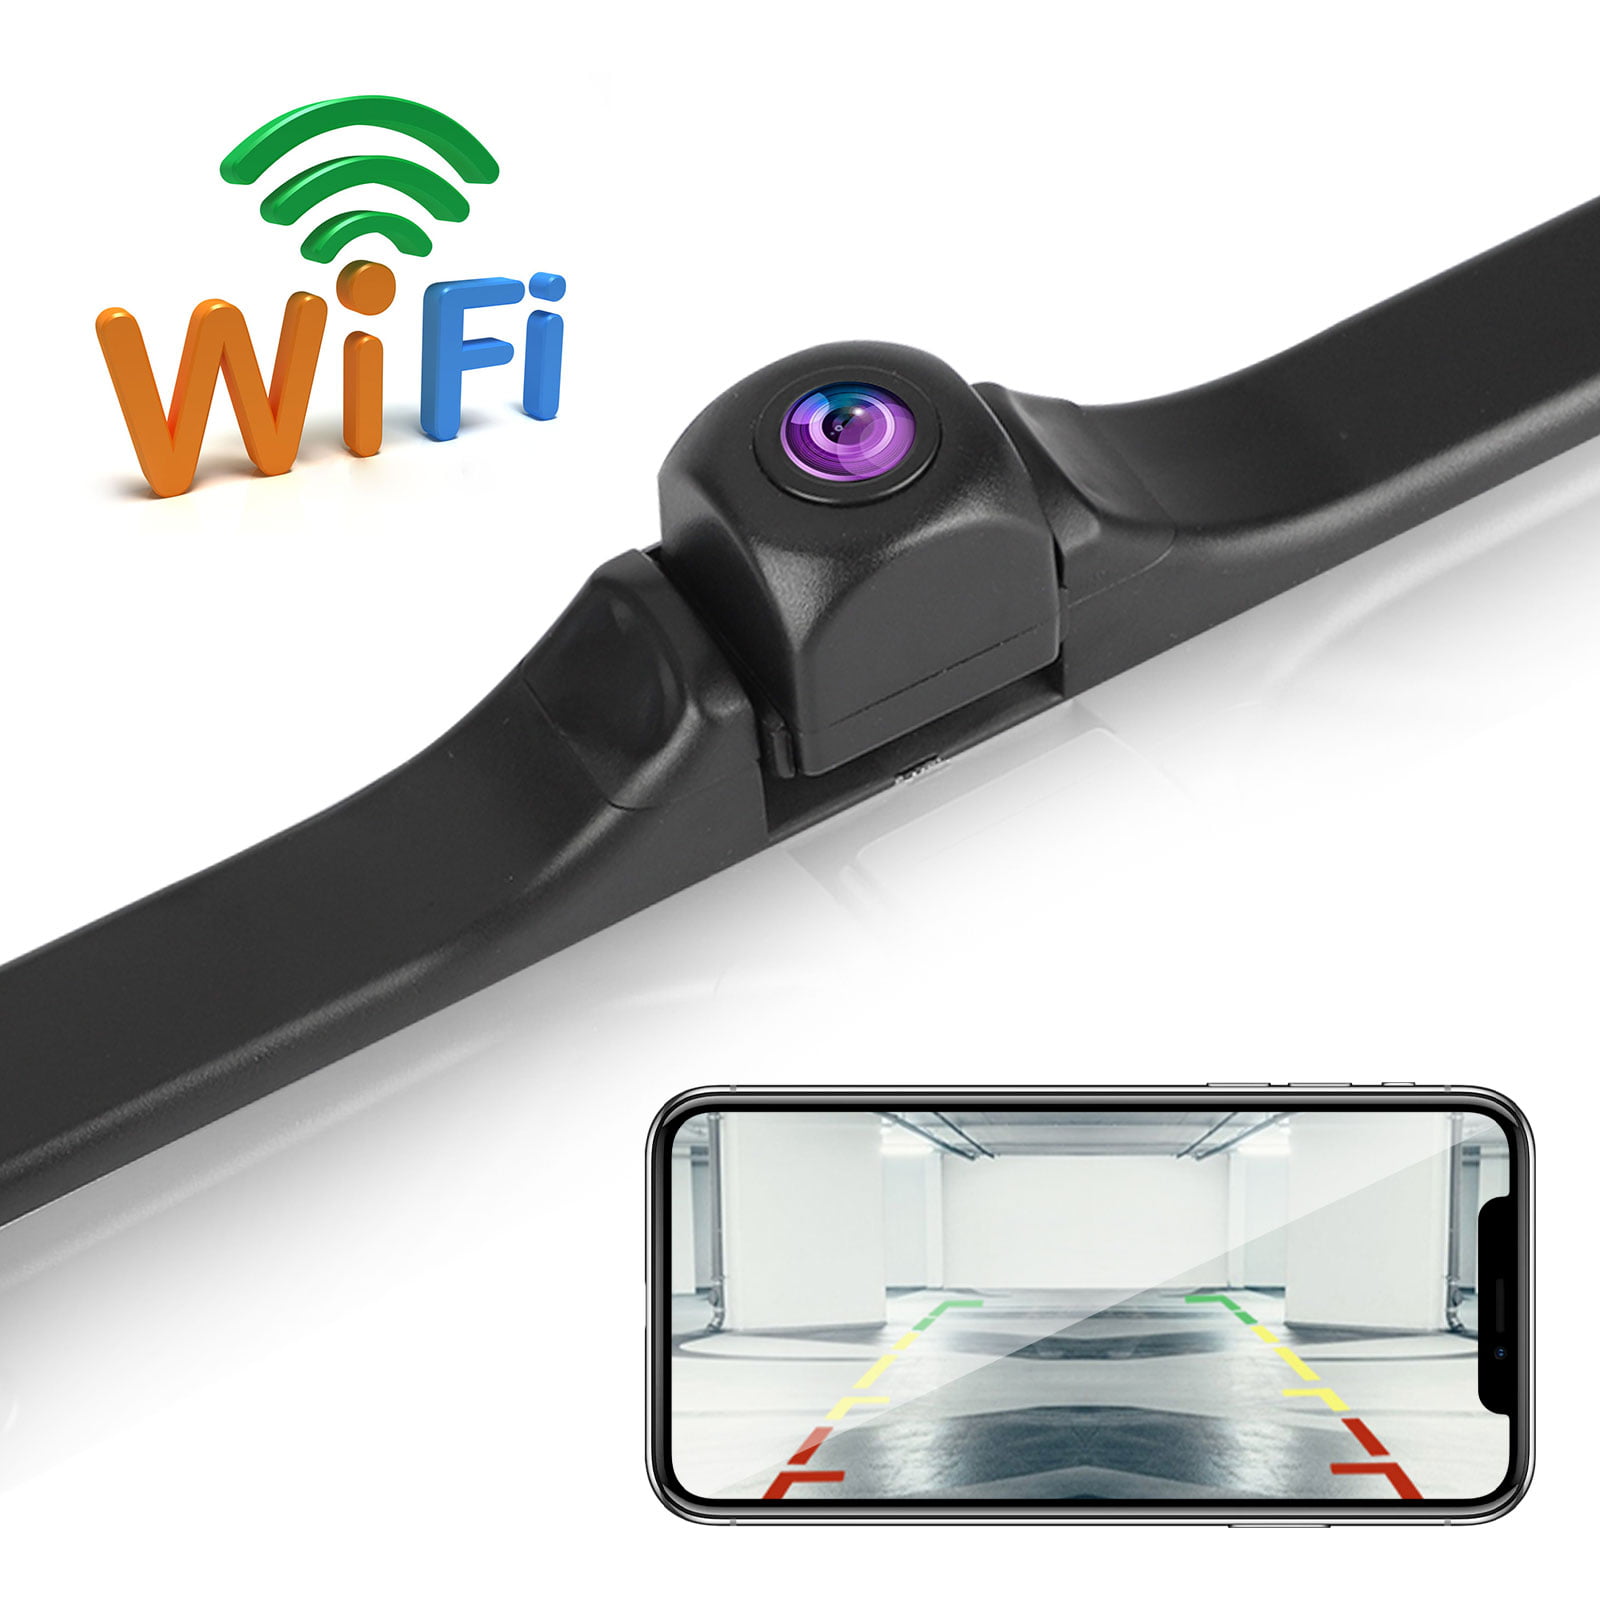 Podofo Wifi Reversing Camera 1080P Full HD Night Vision Wireless Backup Camera Waterproof Wide Angle Car Rear View Camera for Android/IOS Smart Phone